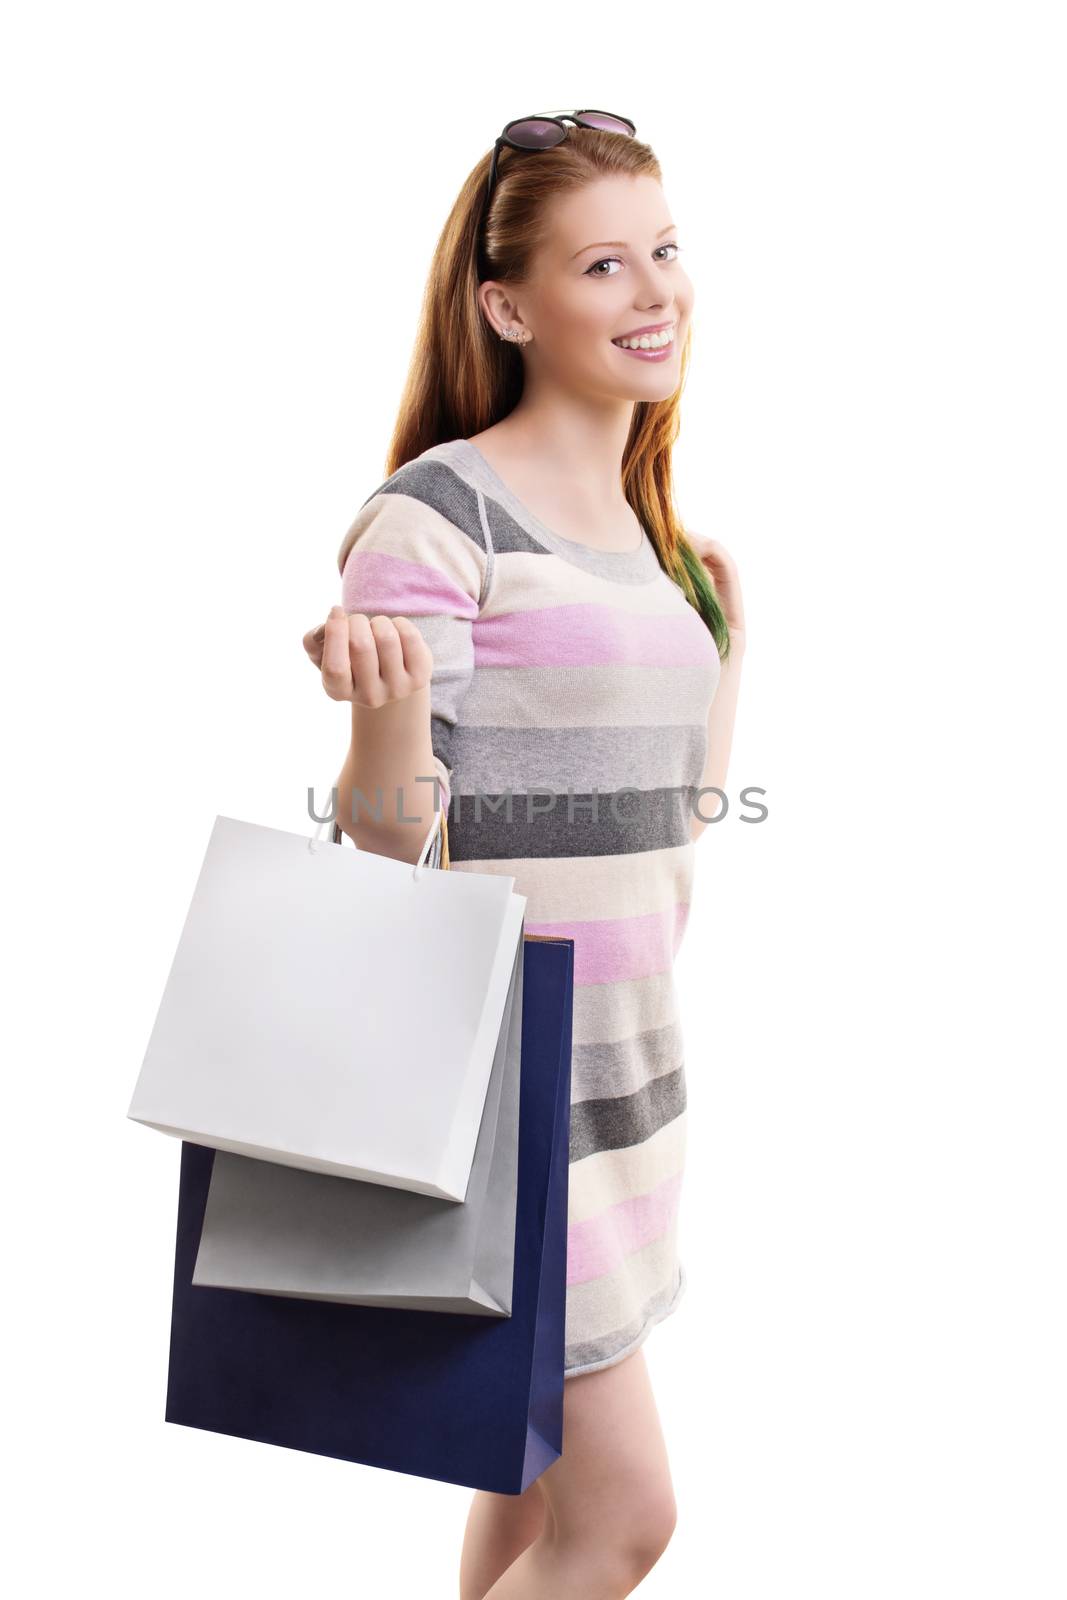 Shopping concept. Portrait of a beautiful smiling young girl in a dress, holding a lot of shopping bags, isolated on white background.